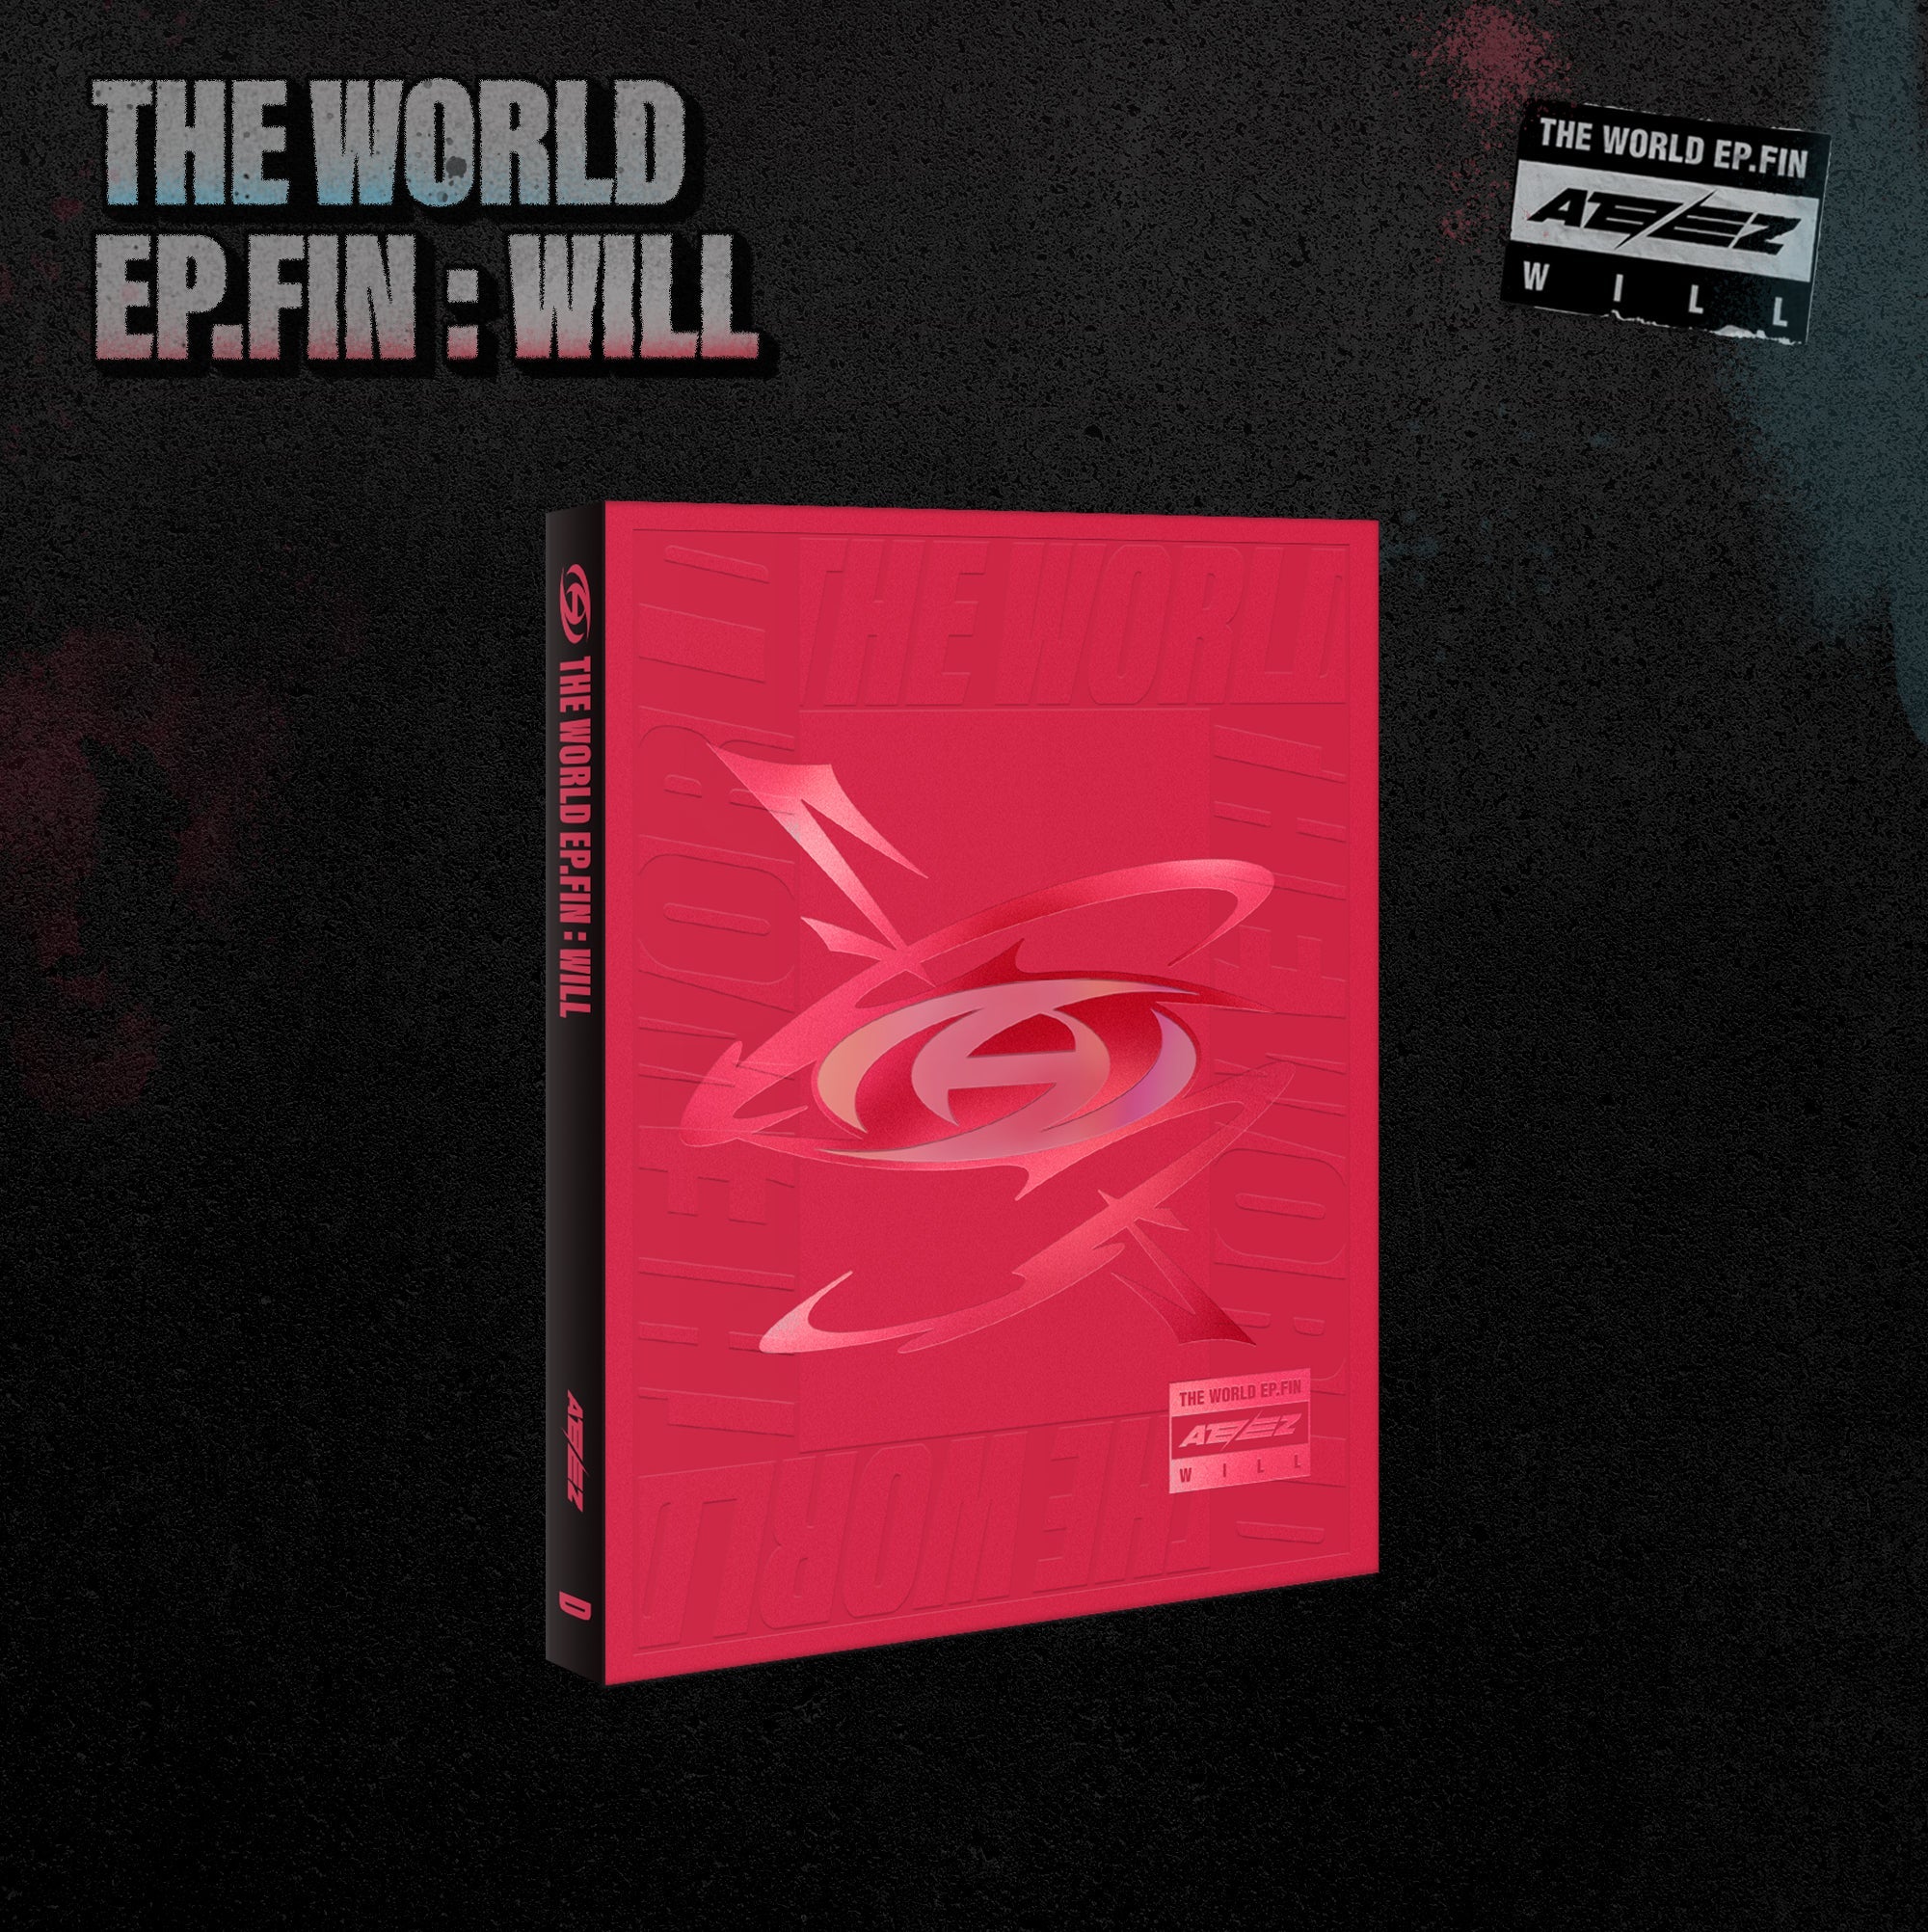 ATEEZ "The WORLD EP.FIN: WILL"